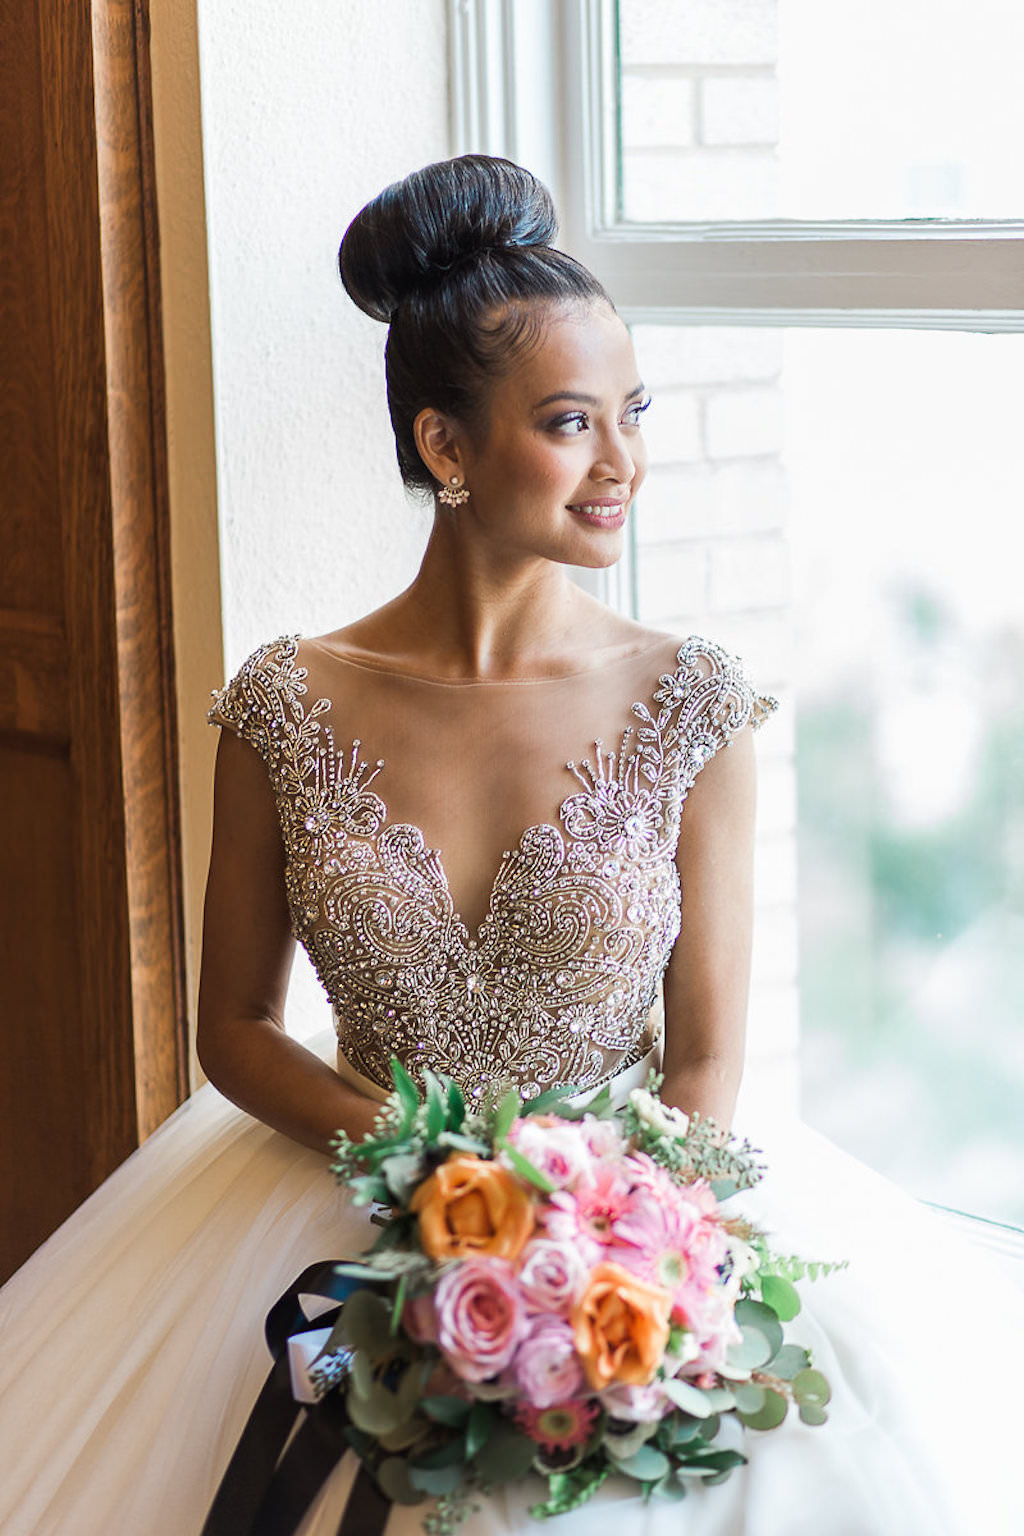 Indoor Bridal Portrait, Bride with Bun Updo, Beaded Bodice Wedding Dress with Full Layered Skirt, with Pink and Orange Rose with Greenery Bouquet with Black Ribbon | Tampa Bay Wedding Hair and Makeup Michele Renee The Studio